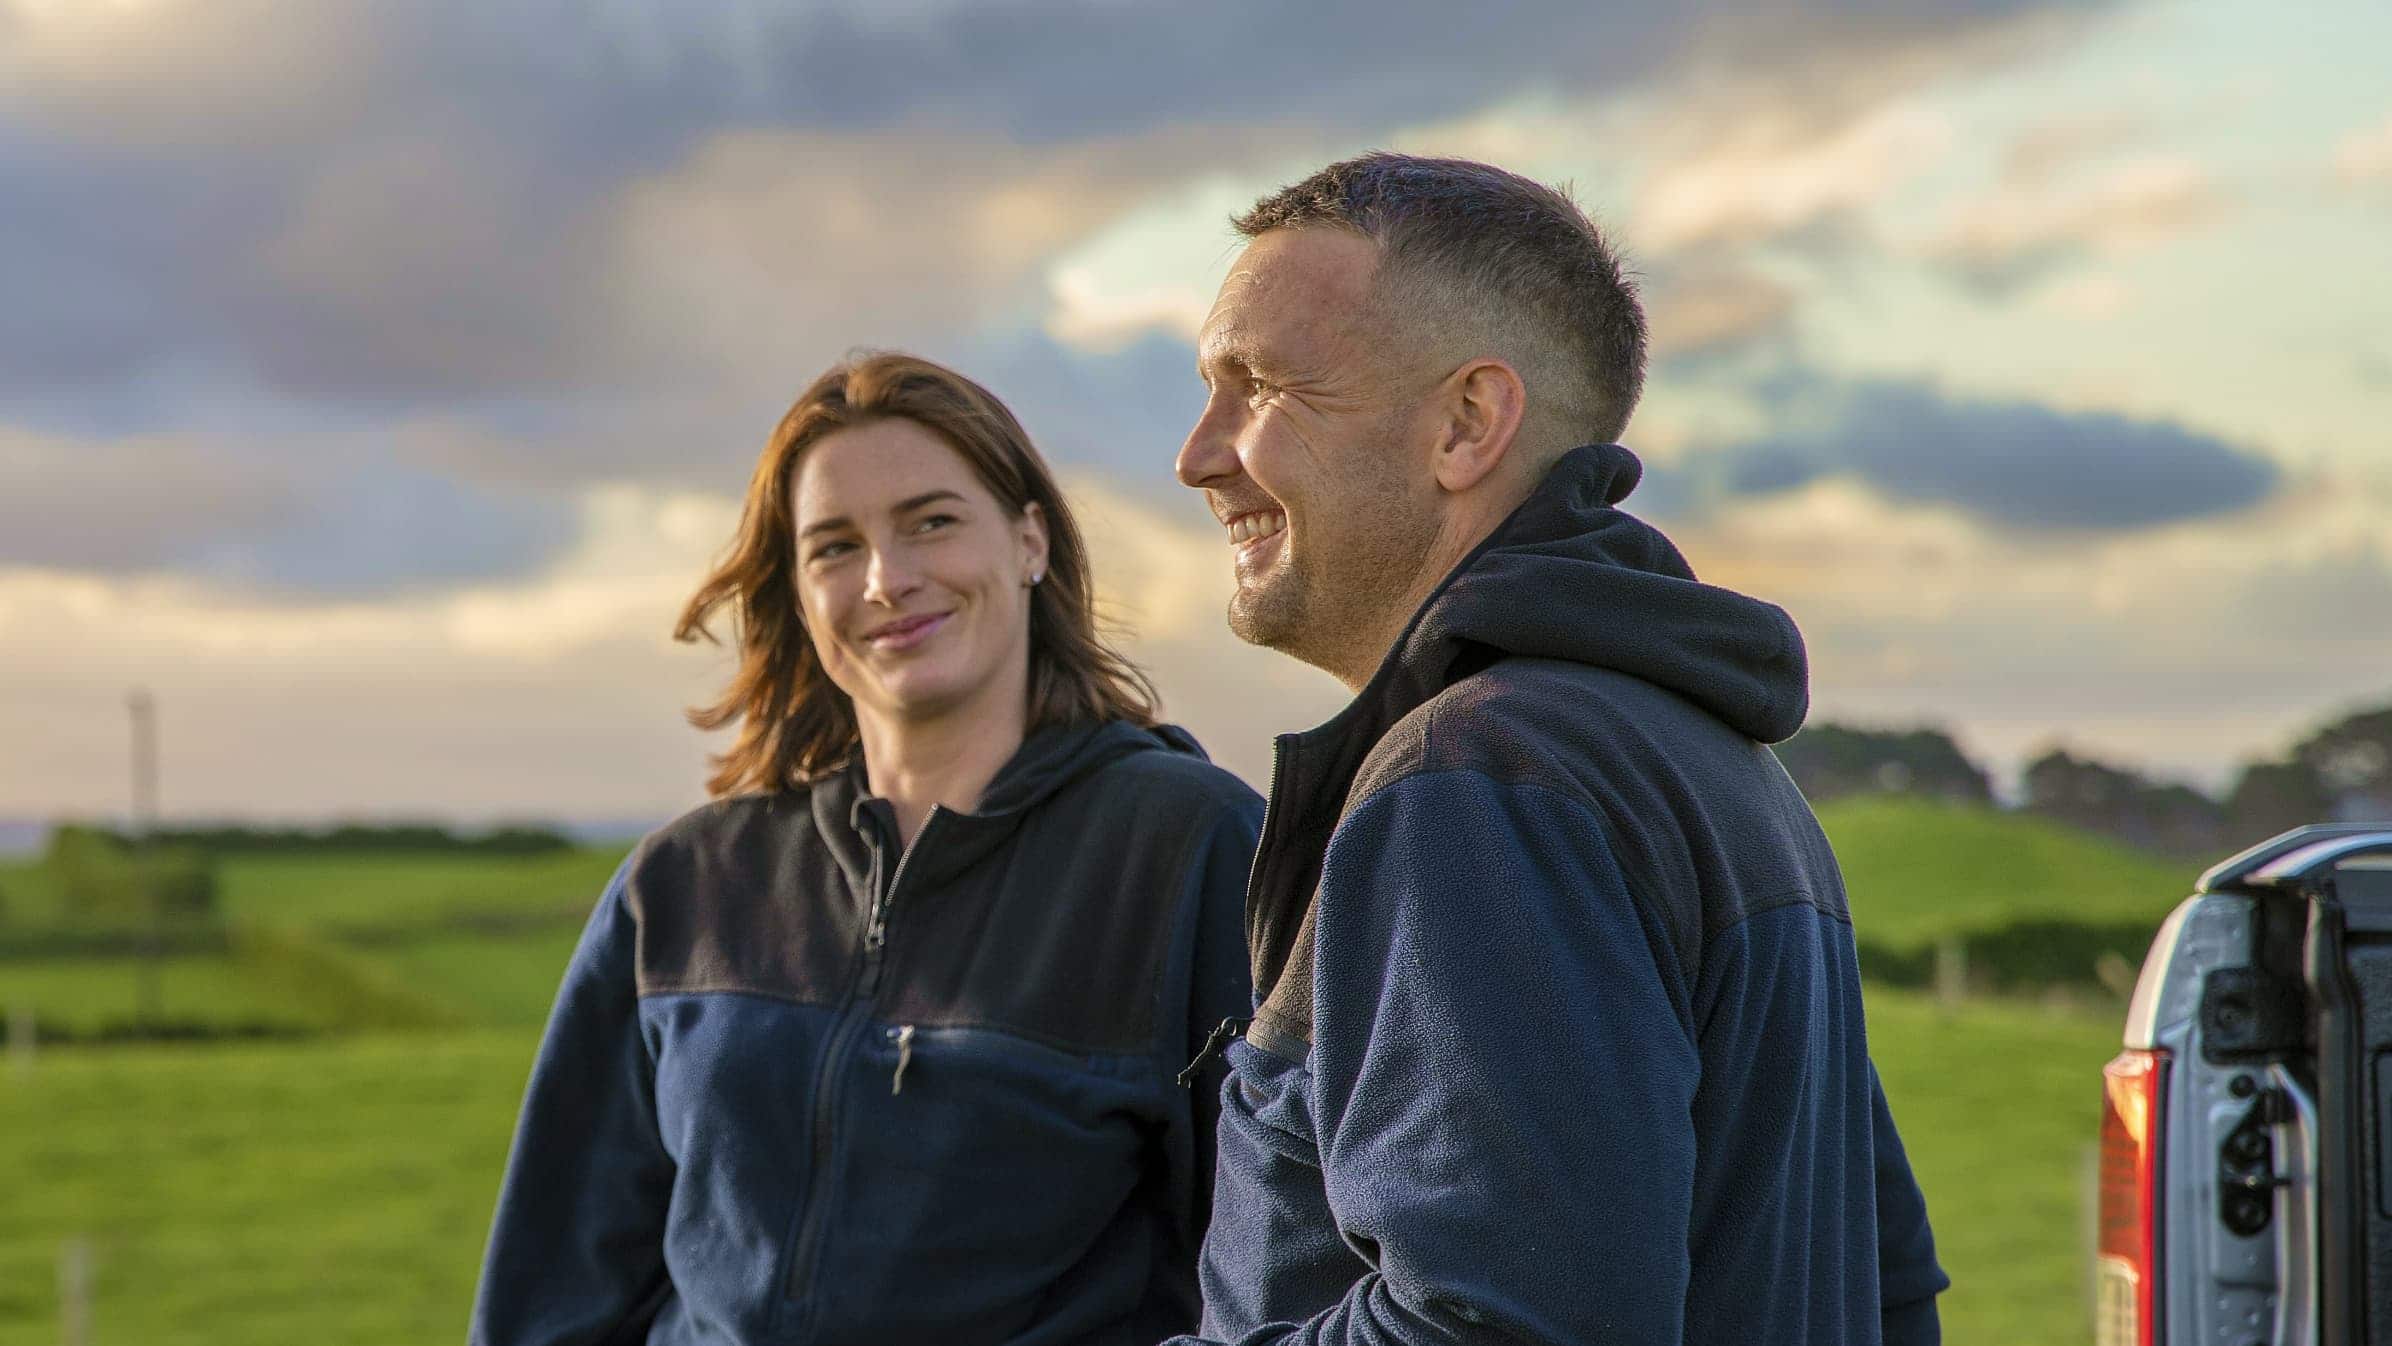 Donovan Croot and Sophie Cookson of Clovalley Farms laugh together on a farm.